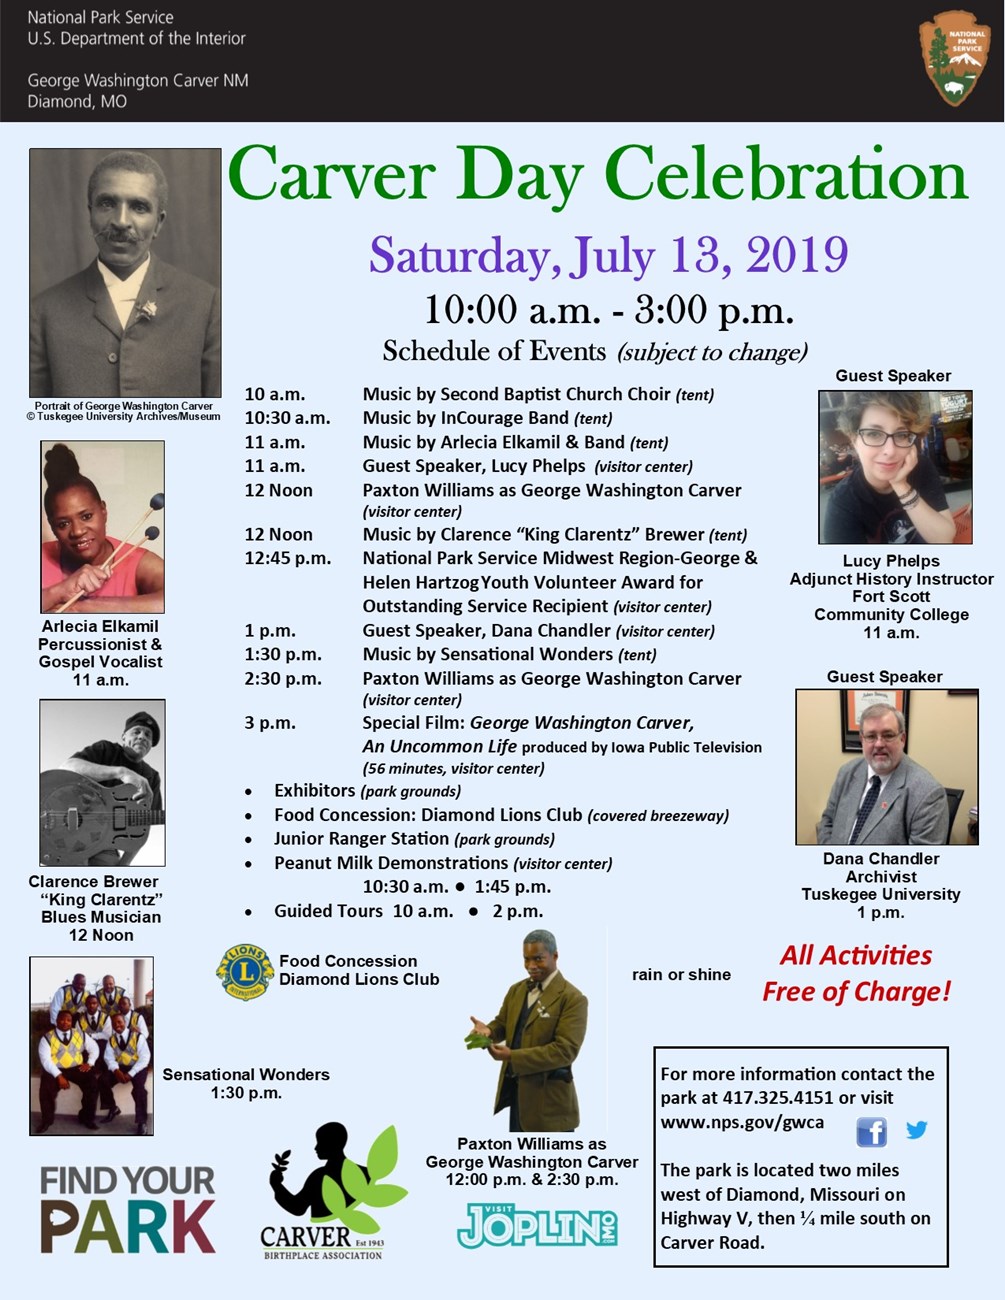 Image of Carver Day 2019 Schedule of Events. Photograph includes additional images of guest speakers, music performers, informational text, logos, and George Washington Carver.